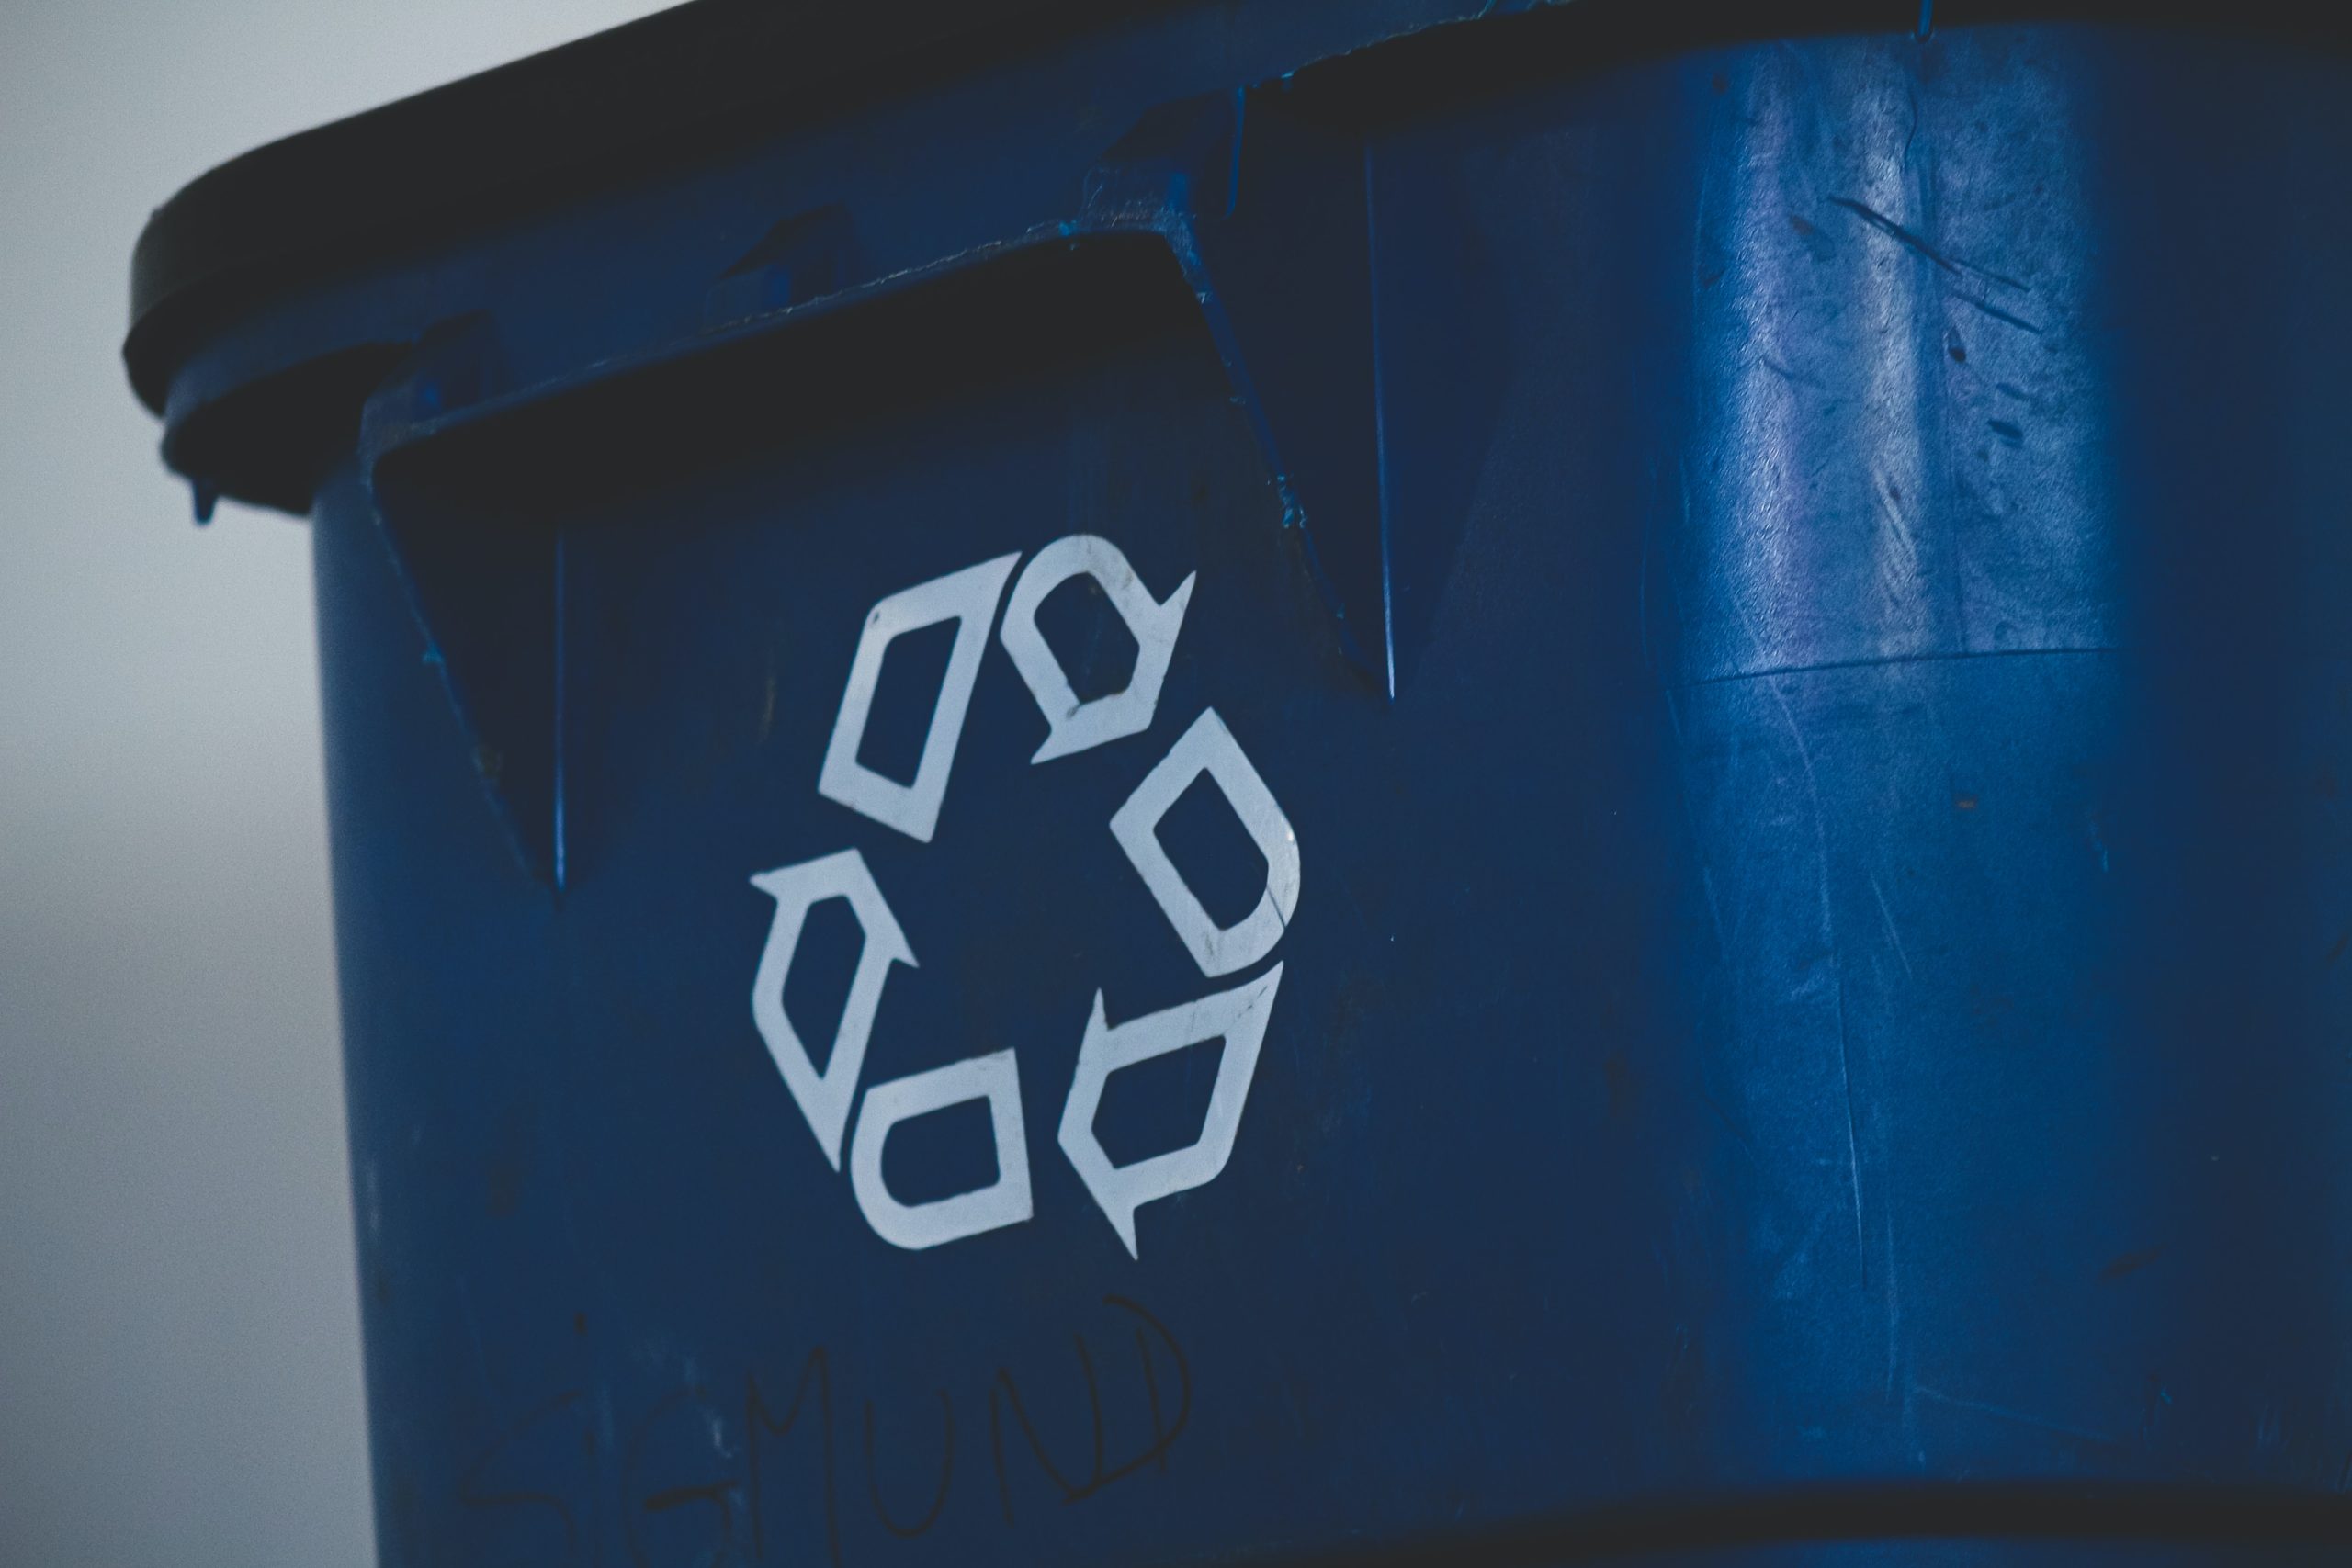 Recycling in the news: Rogers’ 3-strike system, tires and more